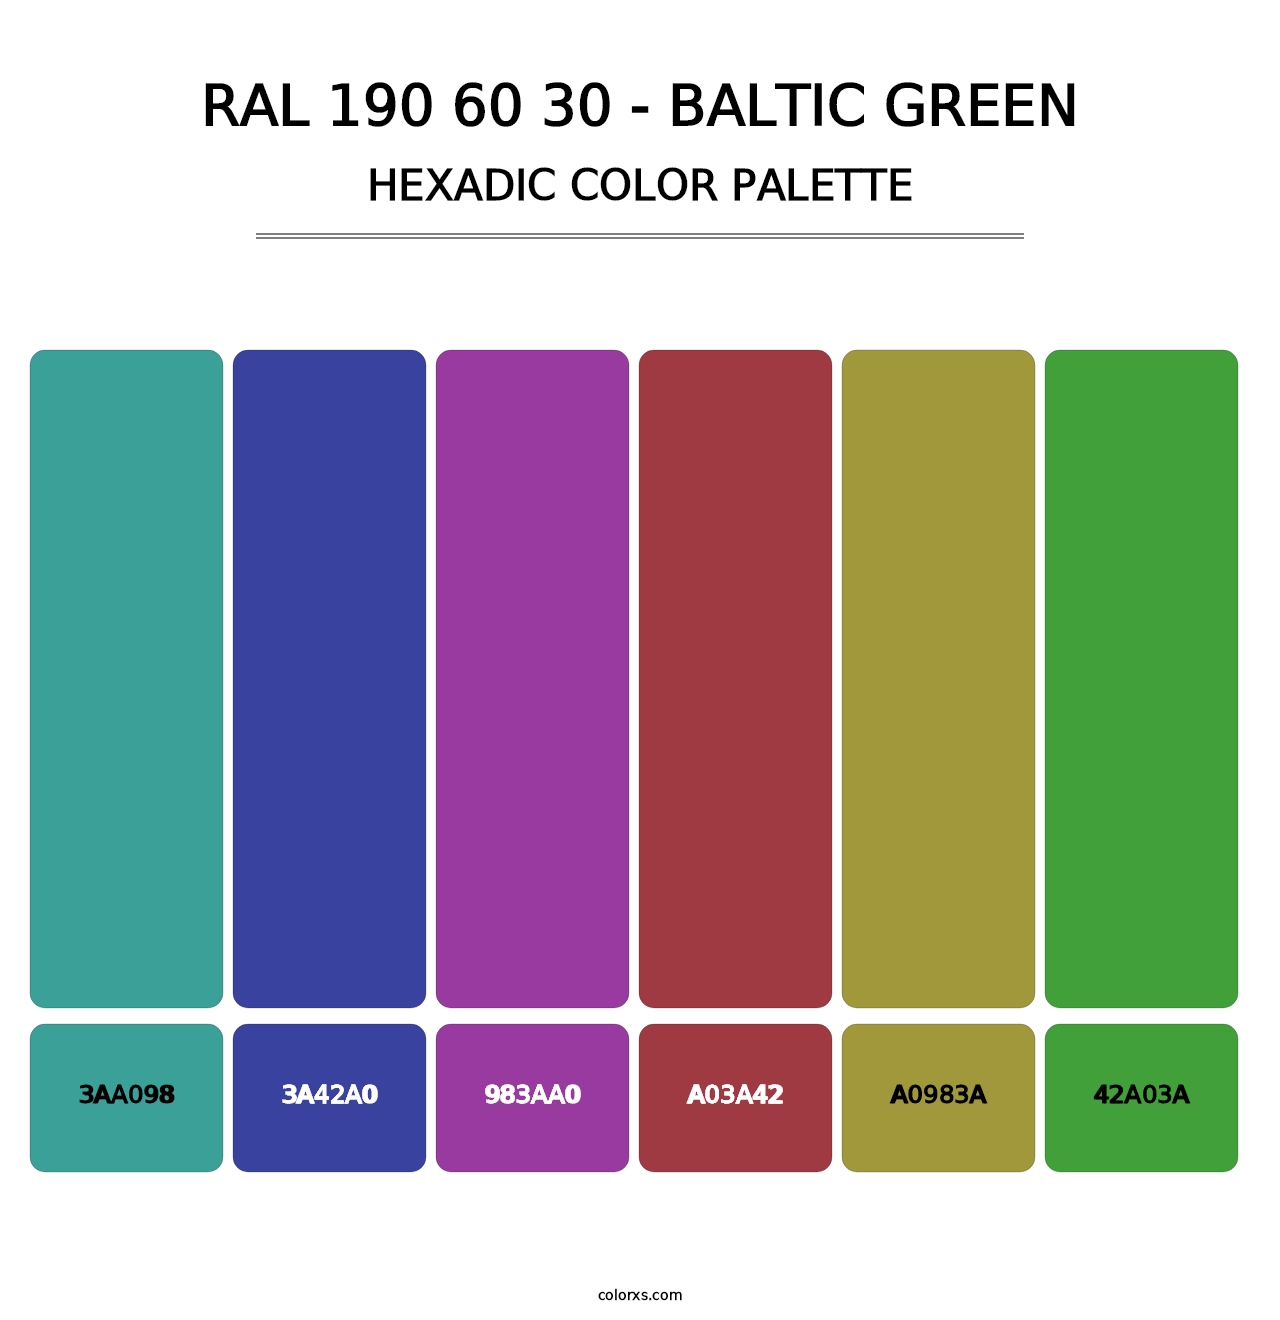 RAL 190 60 30 - Baltic Green - Hexadic Color Palette